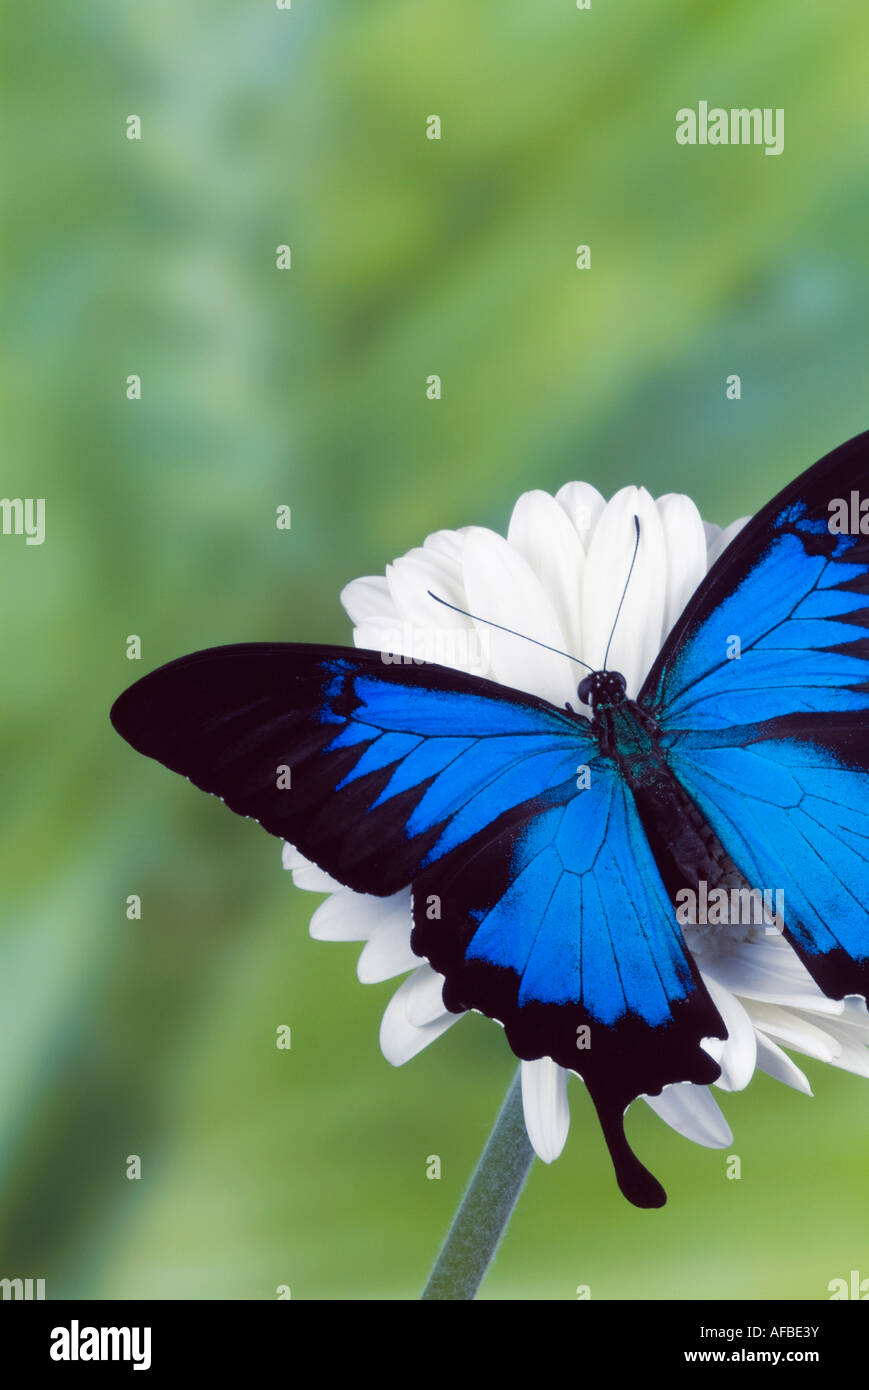 Blue Mountain Swallowtail on flower 'Papilio ulysses ulysses' - Indonesia Stock Photo